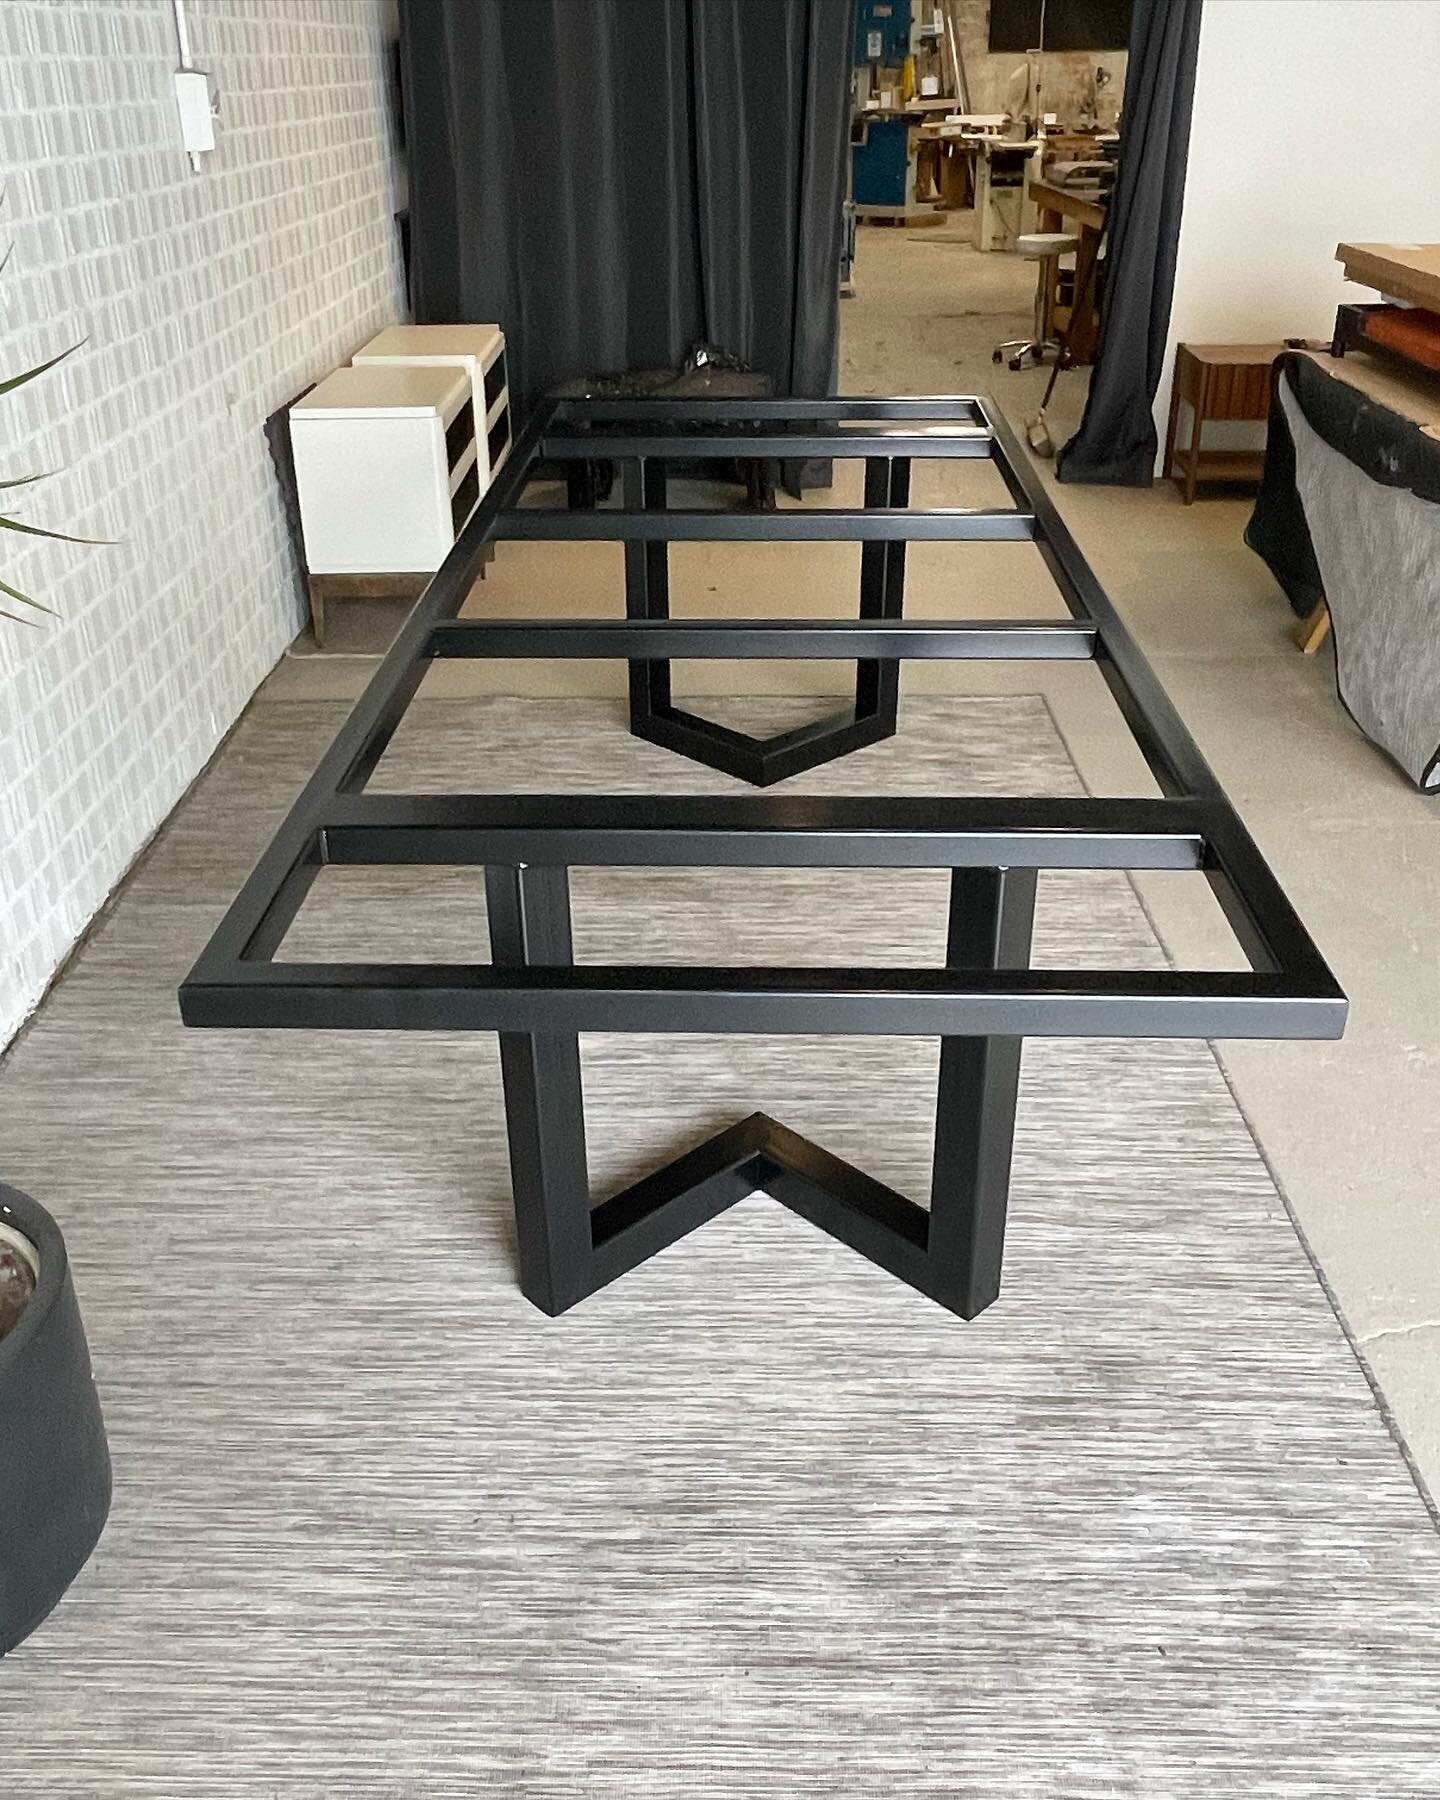 Chevron style table base currently sitting in @paradoxmovement workshop showroom. Designed to hold a 3 meter marble top.